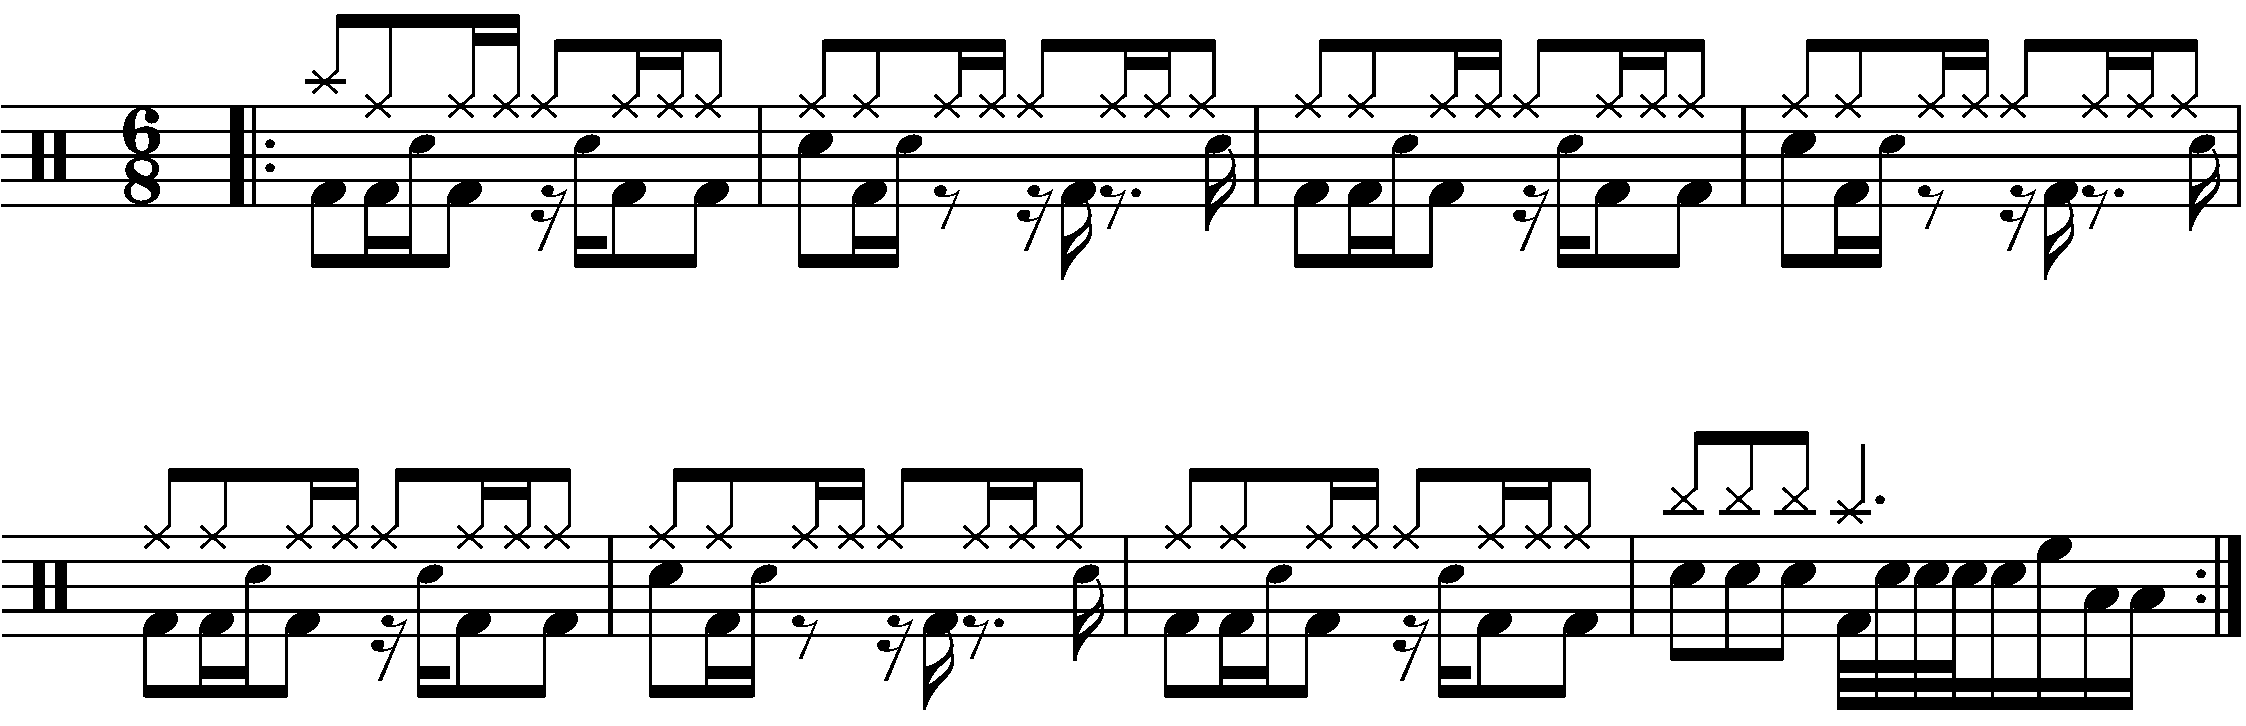 A four bar phrase in 6/8 based on patterns in half time